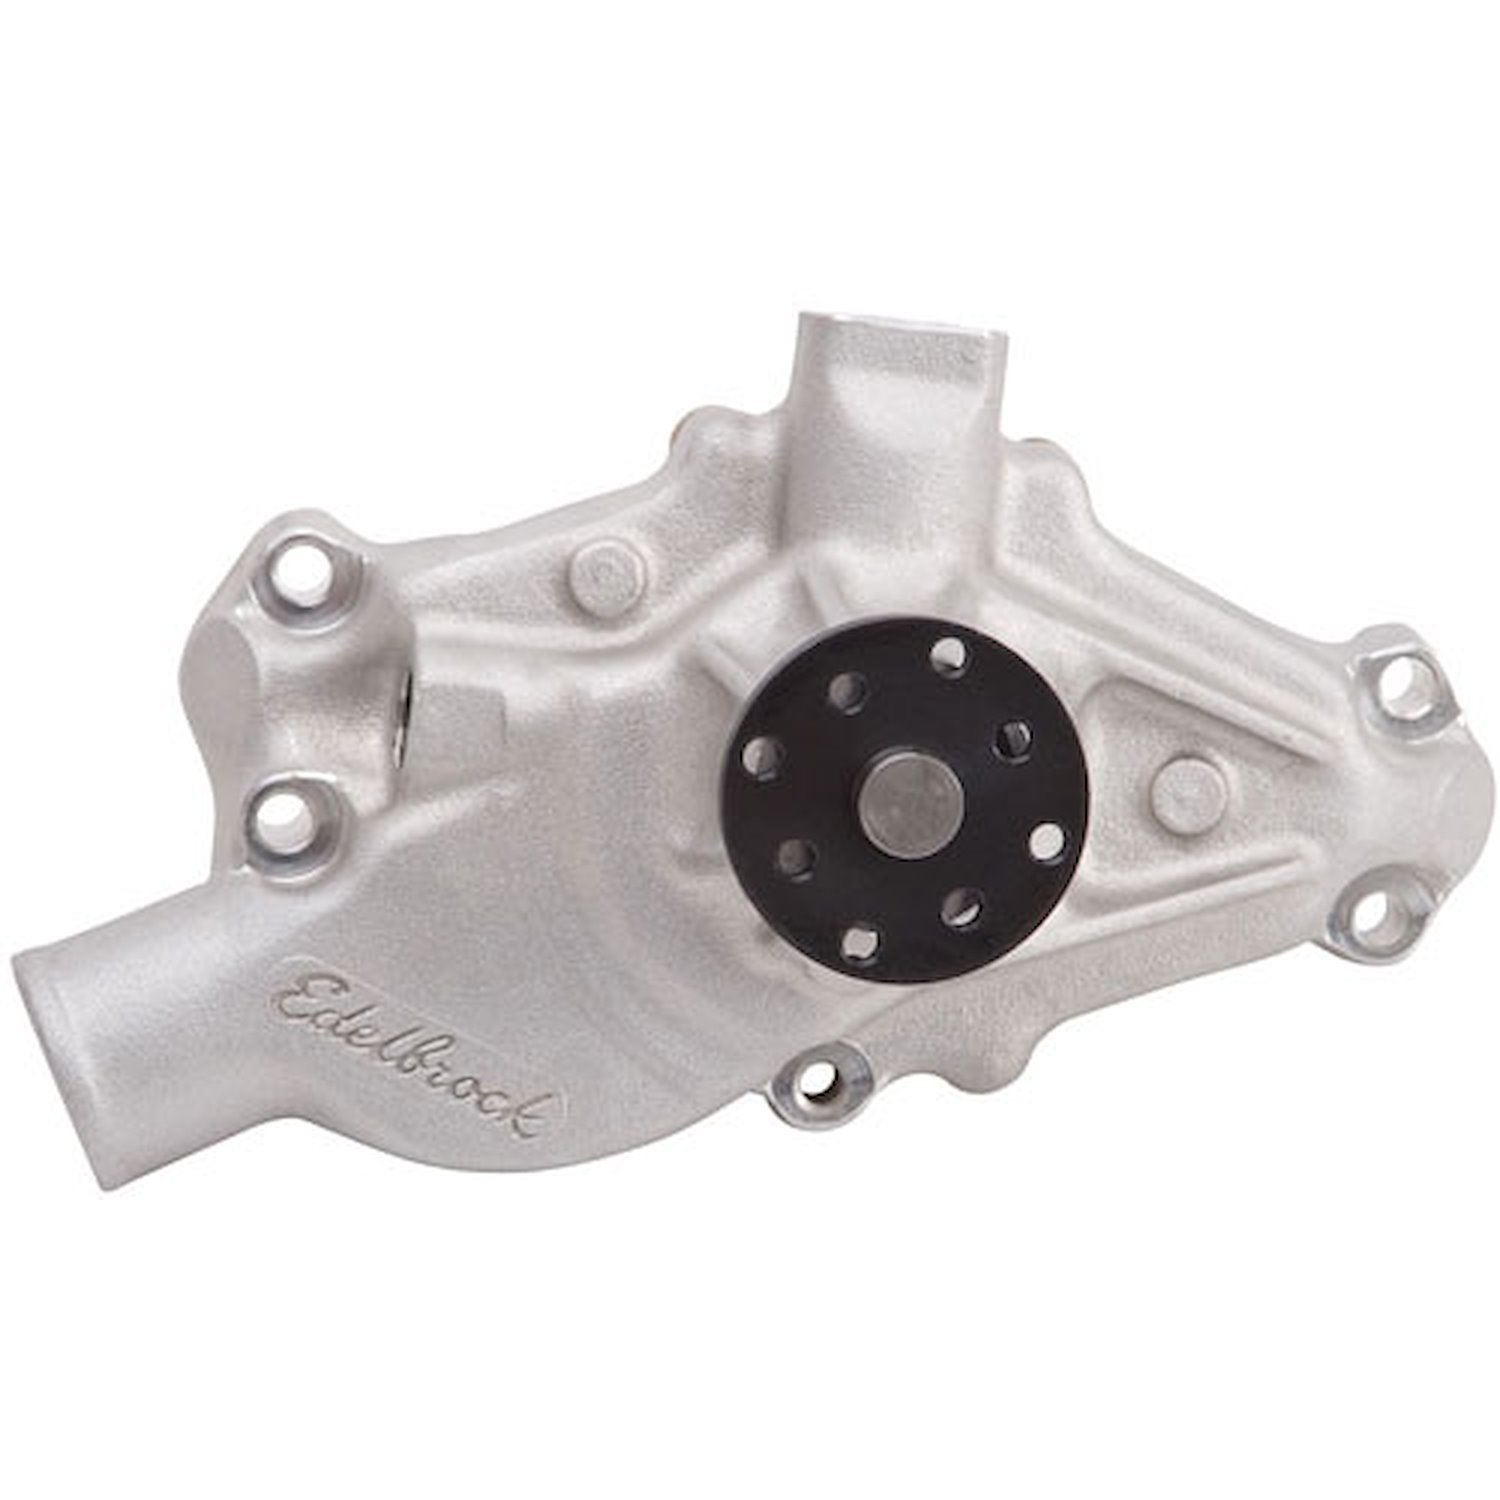 Victor Series Satin Aluminum Water Pump for 1955-1972 Chevy Small Block Cars & Trucks